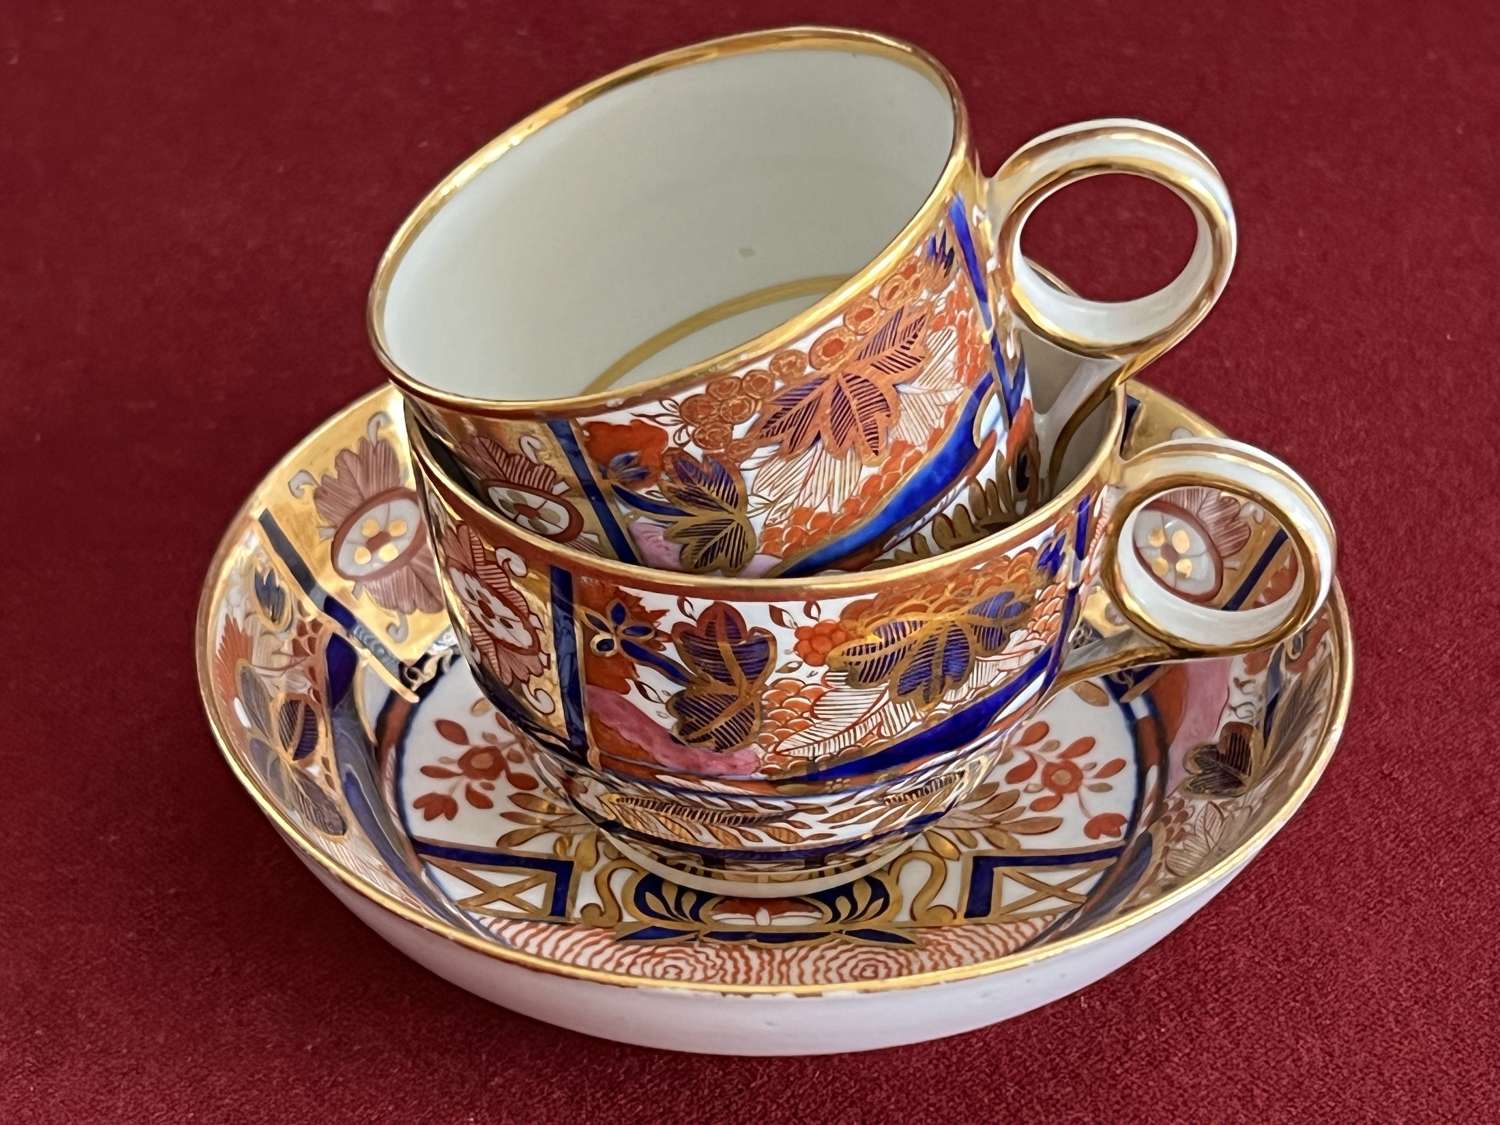 A Chamberlain Worcester Porcelain Trio c.1802-1810 in pattern 240